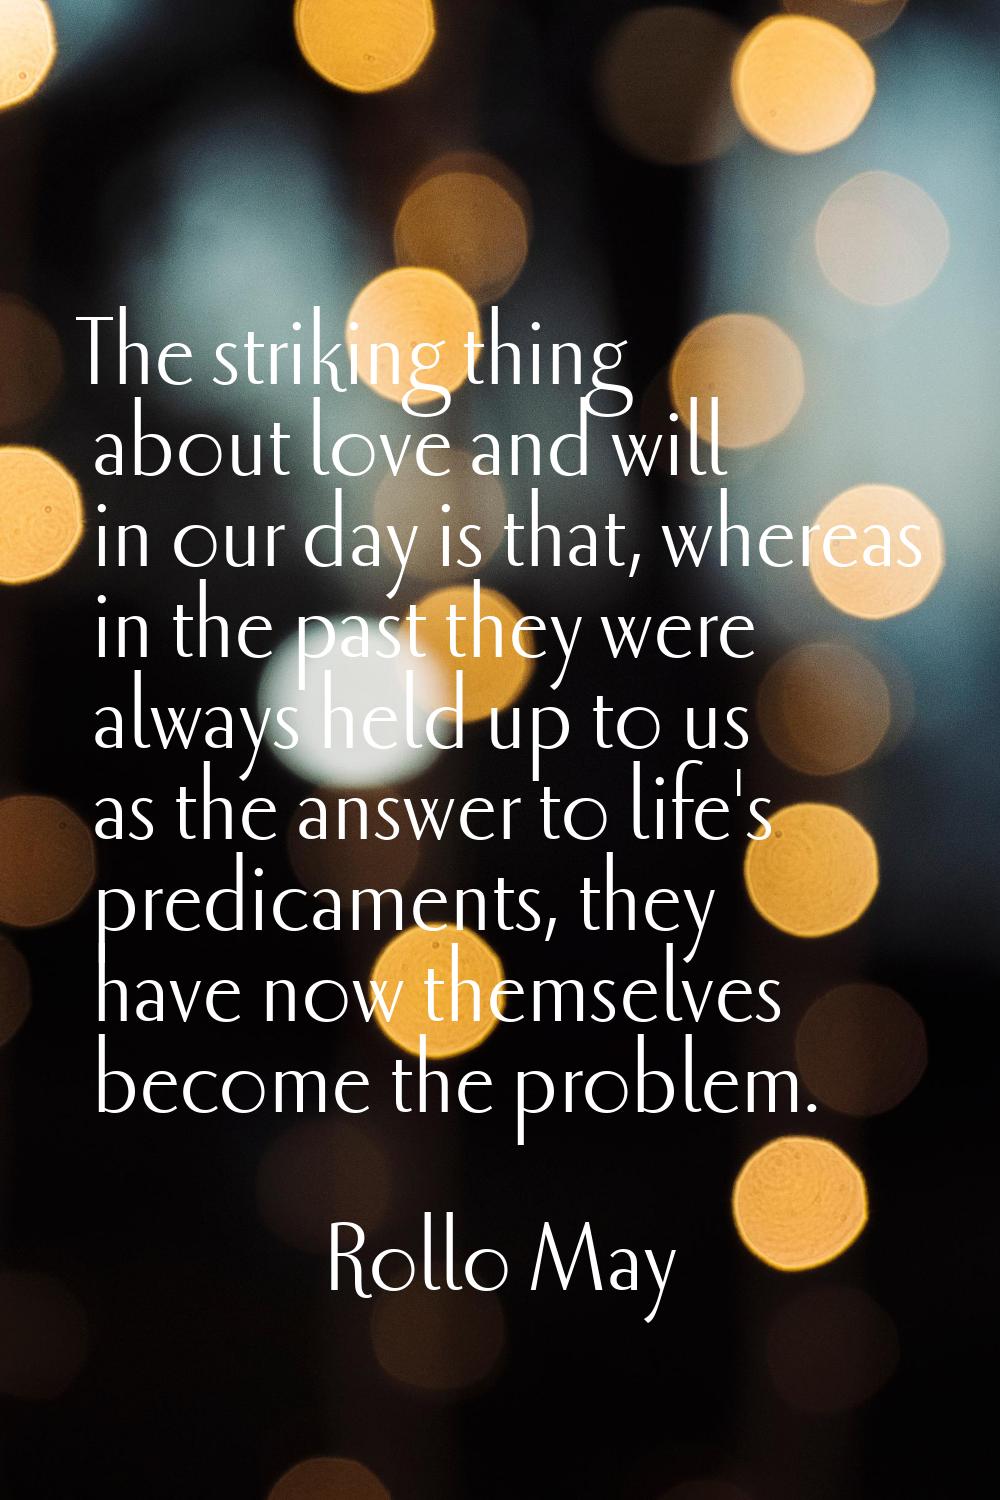 The striking thing about love and will in our day is that, whereas in the past they were always hel